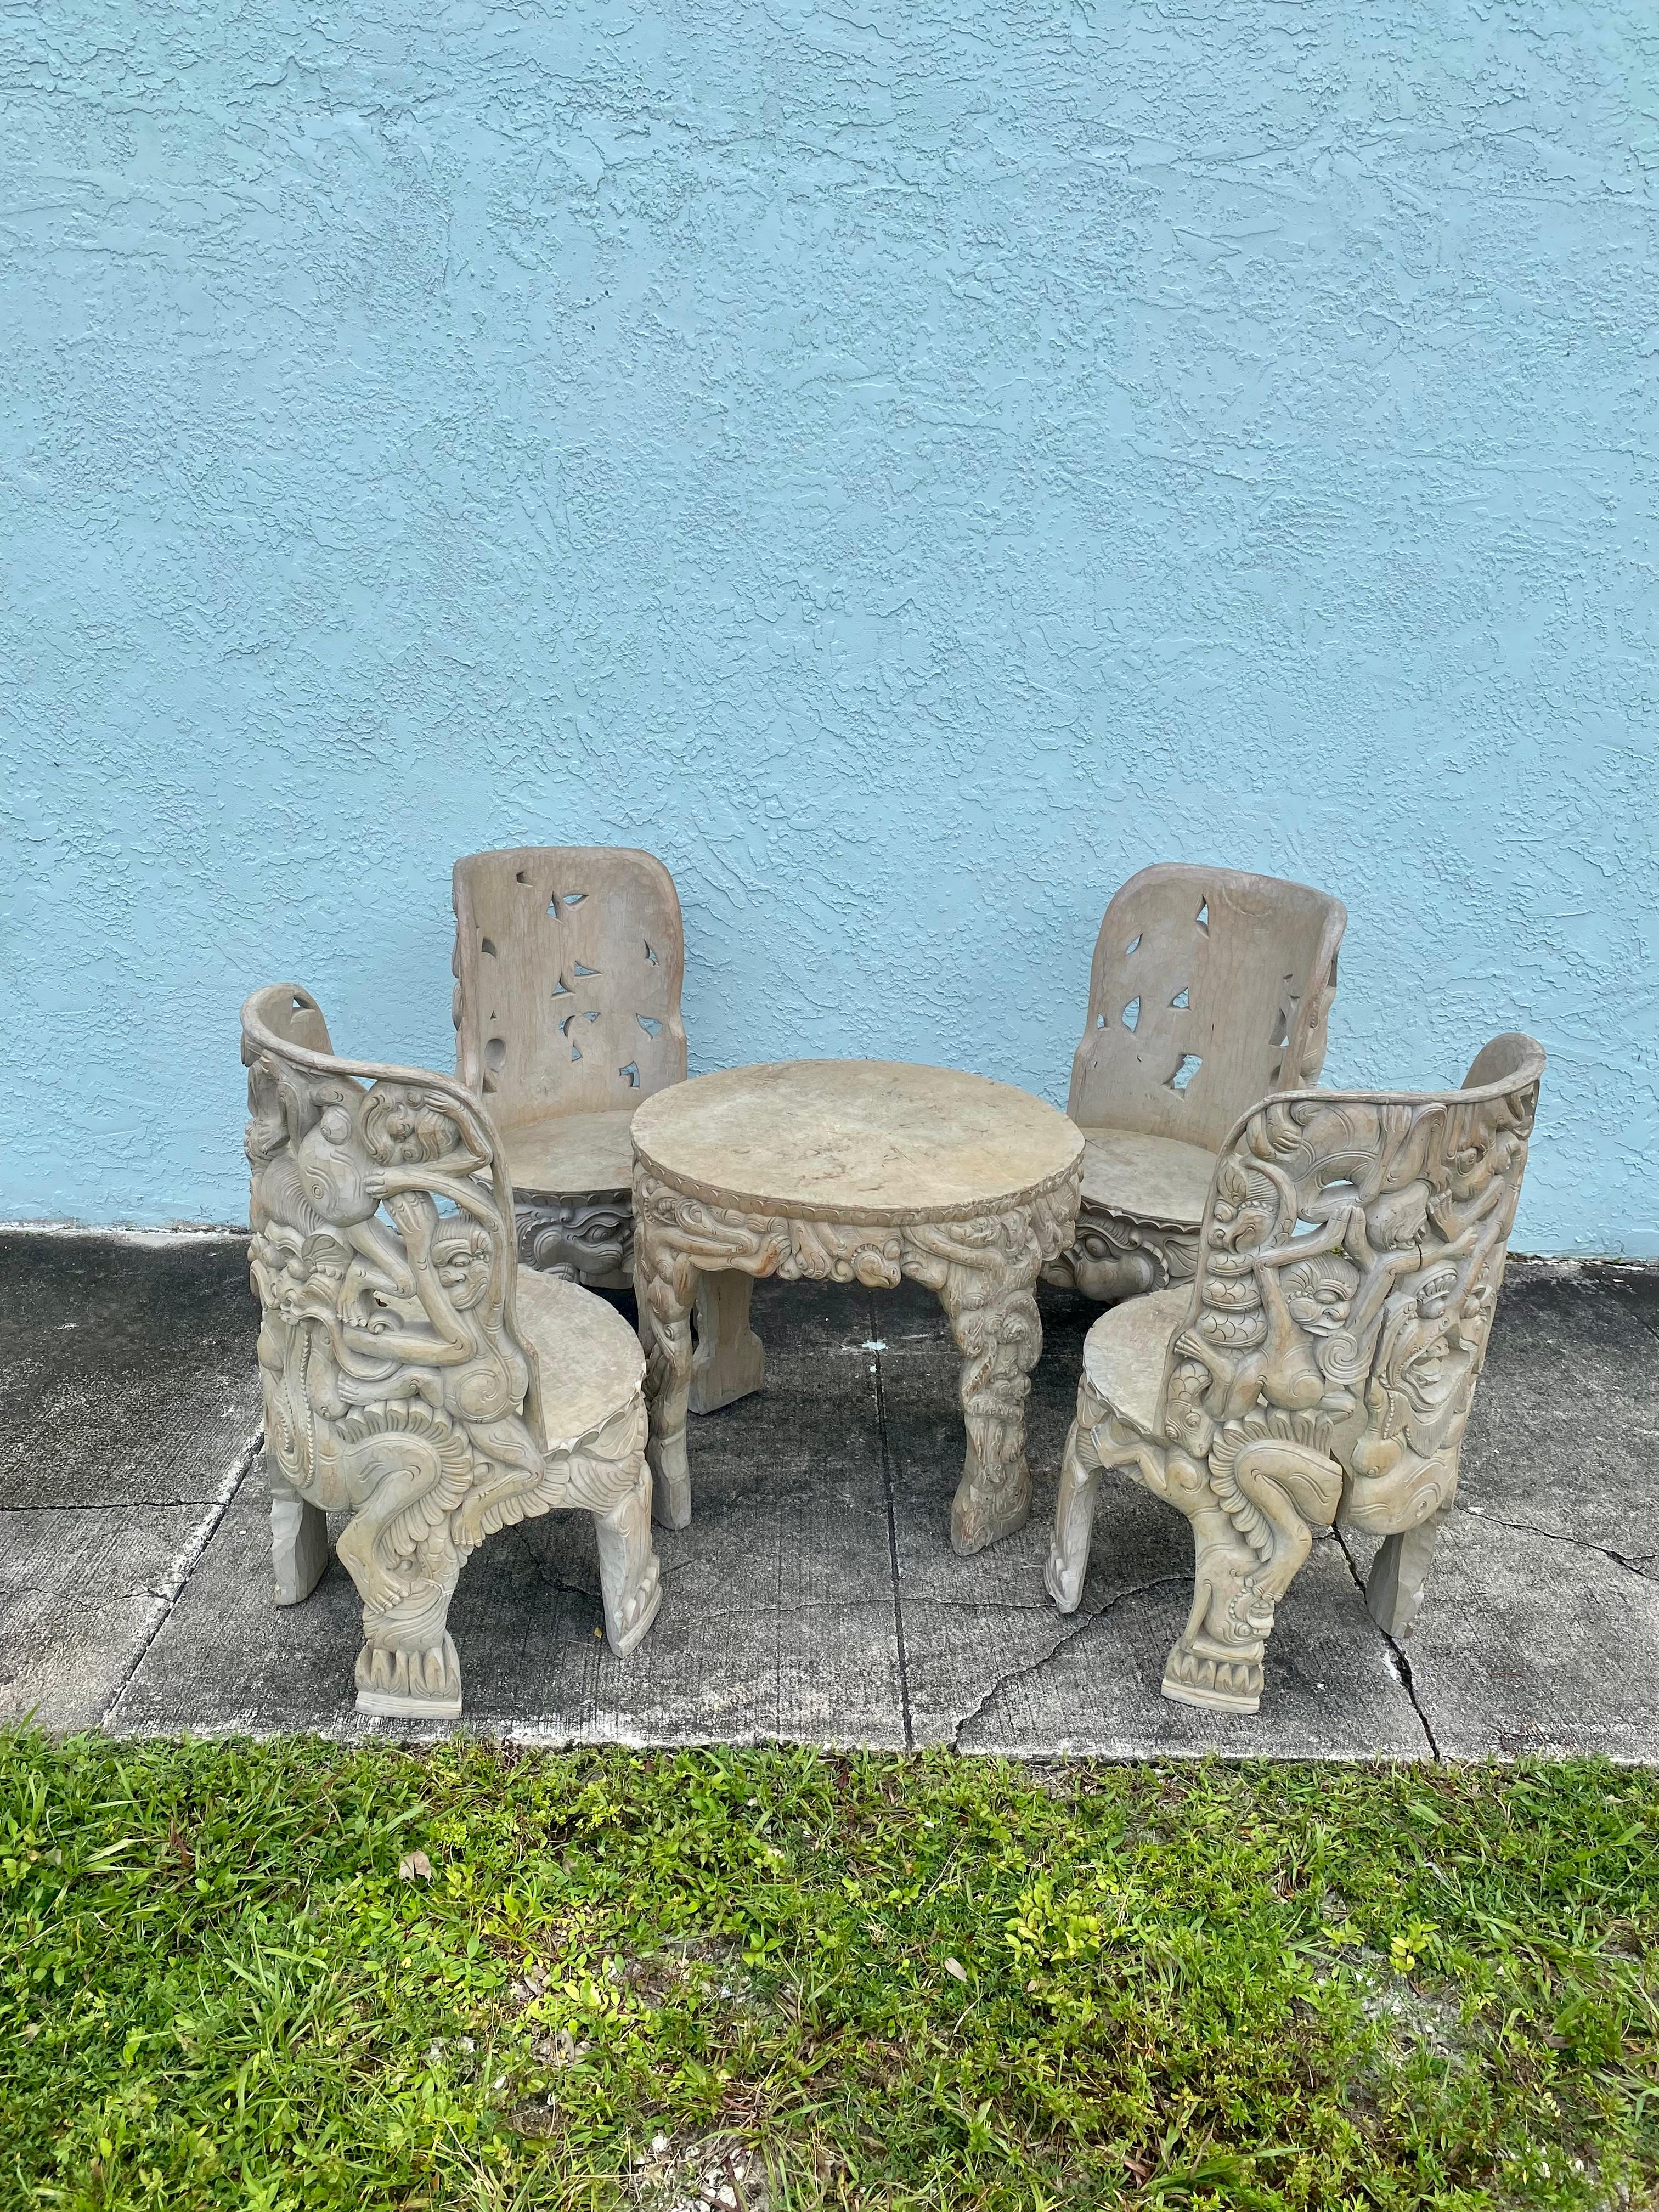 On offer on this occasion is one of the most stunning, table and chairs you could hope to find. This is an ultra-rare opportunity to acquire what is the most spectacular and beautifully-presented figurative chairs and table set. Outstanding design